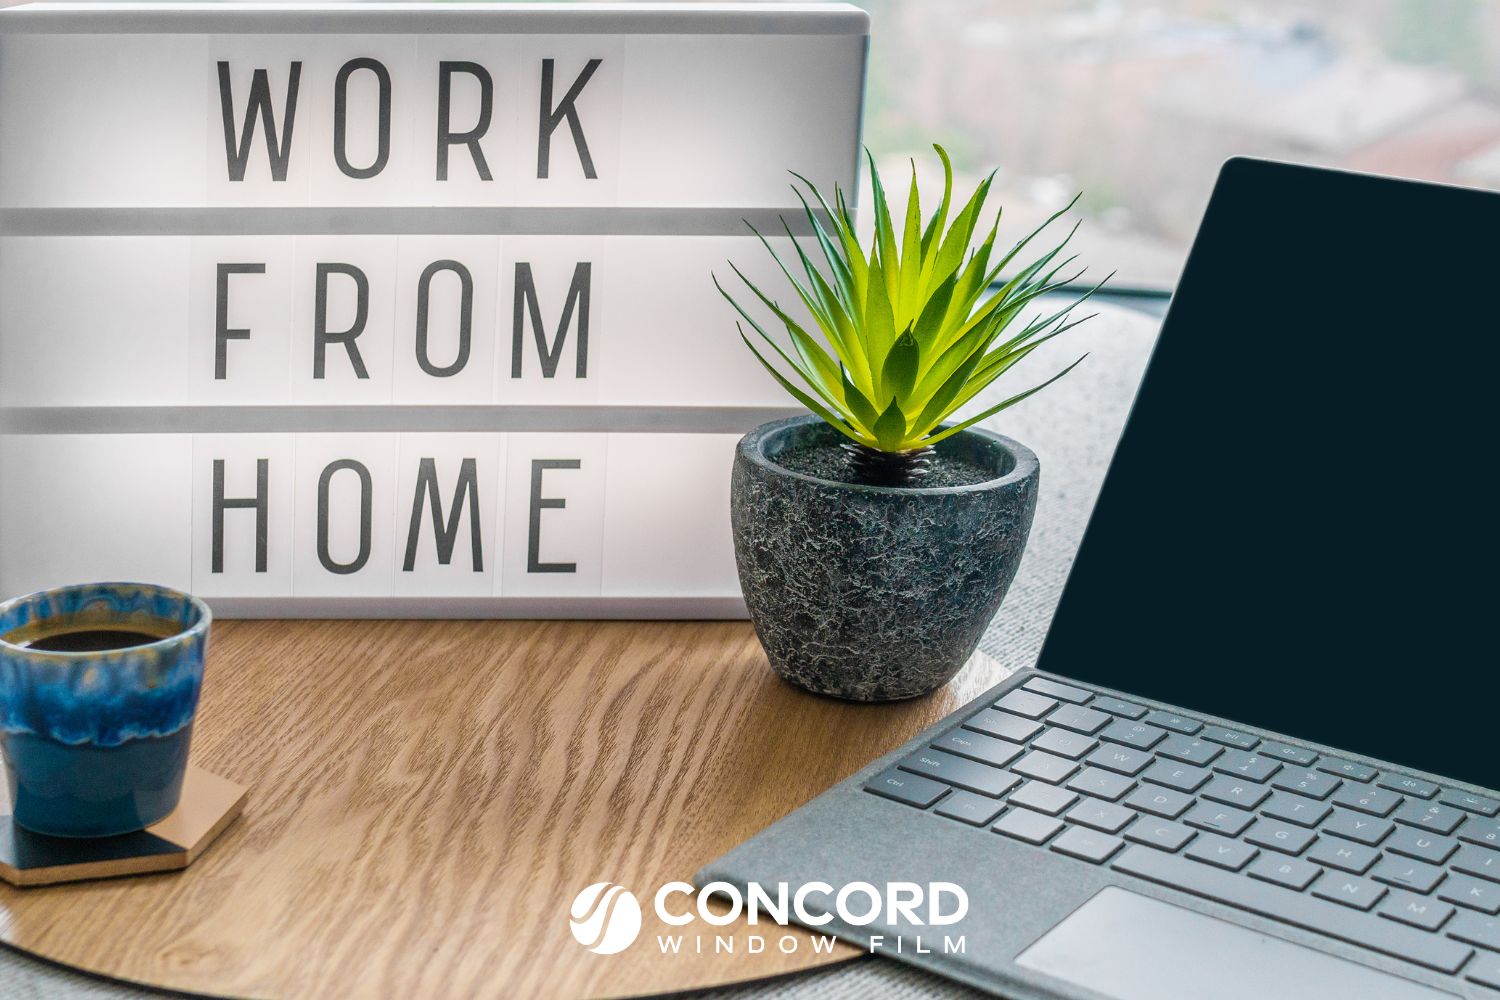 Laptop and Work deom Home sign on a desk